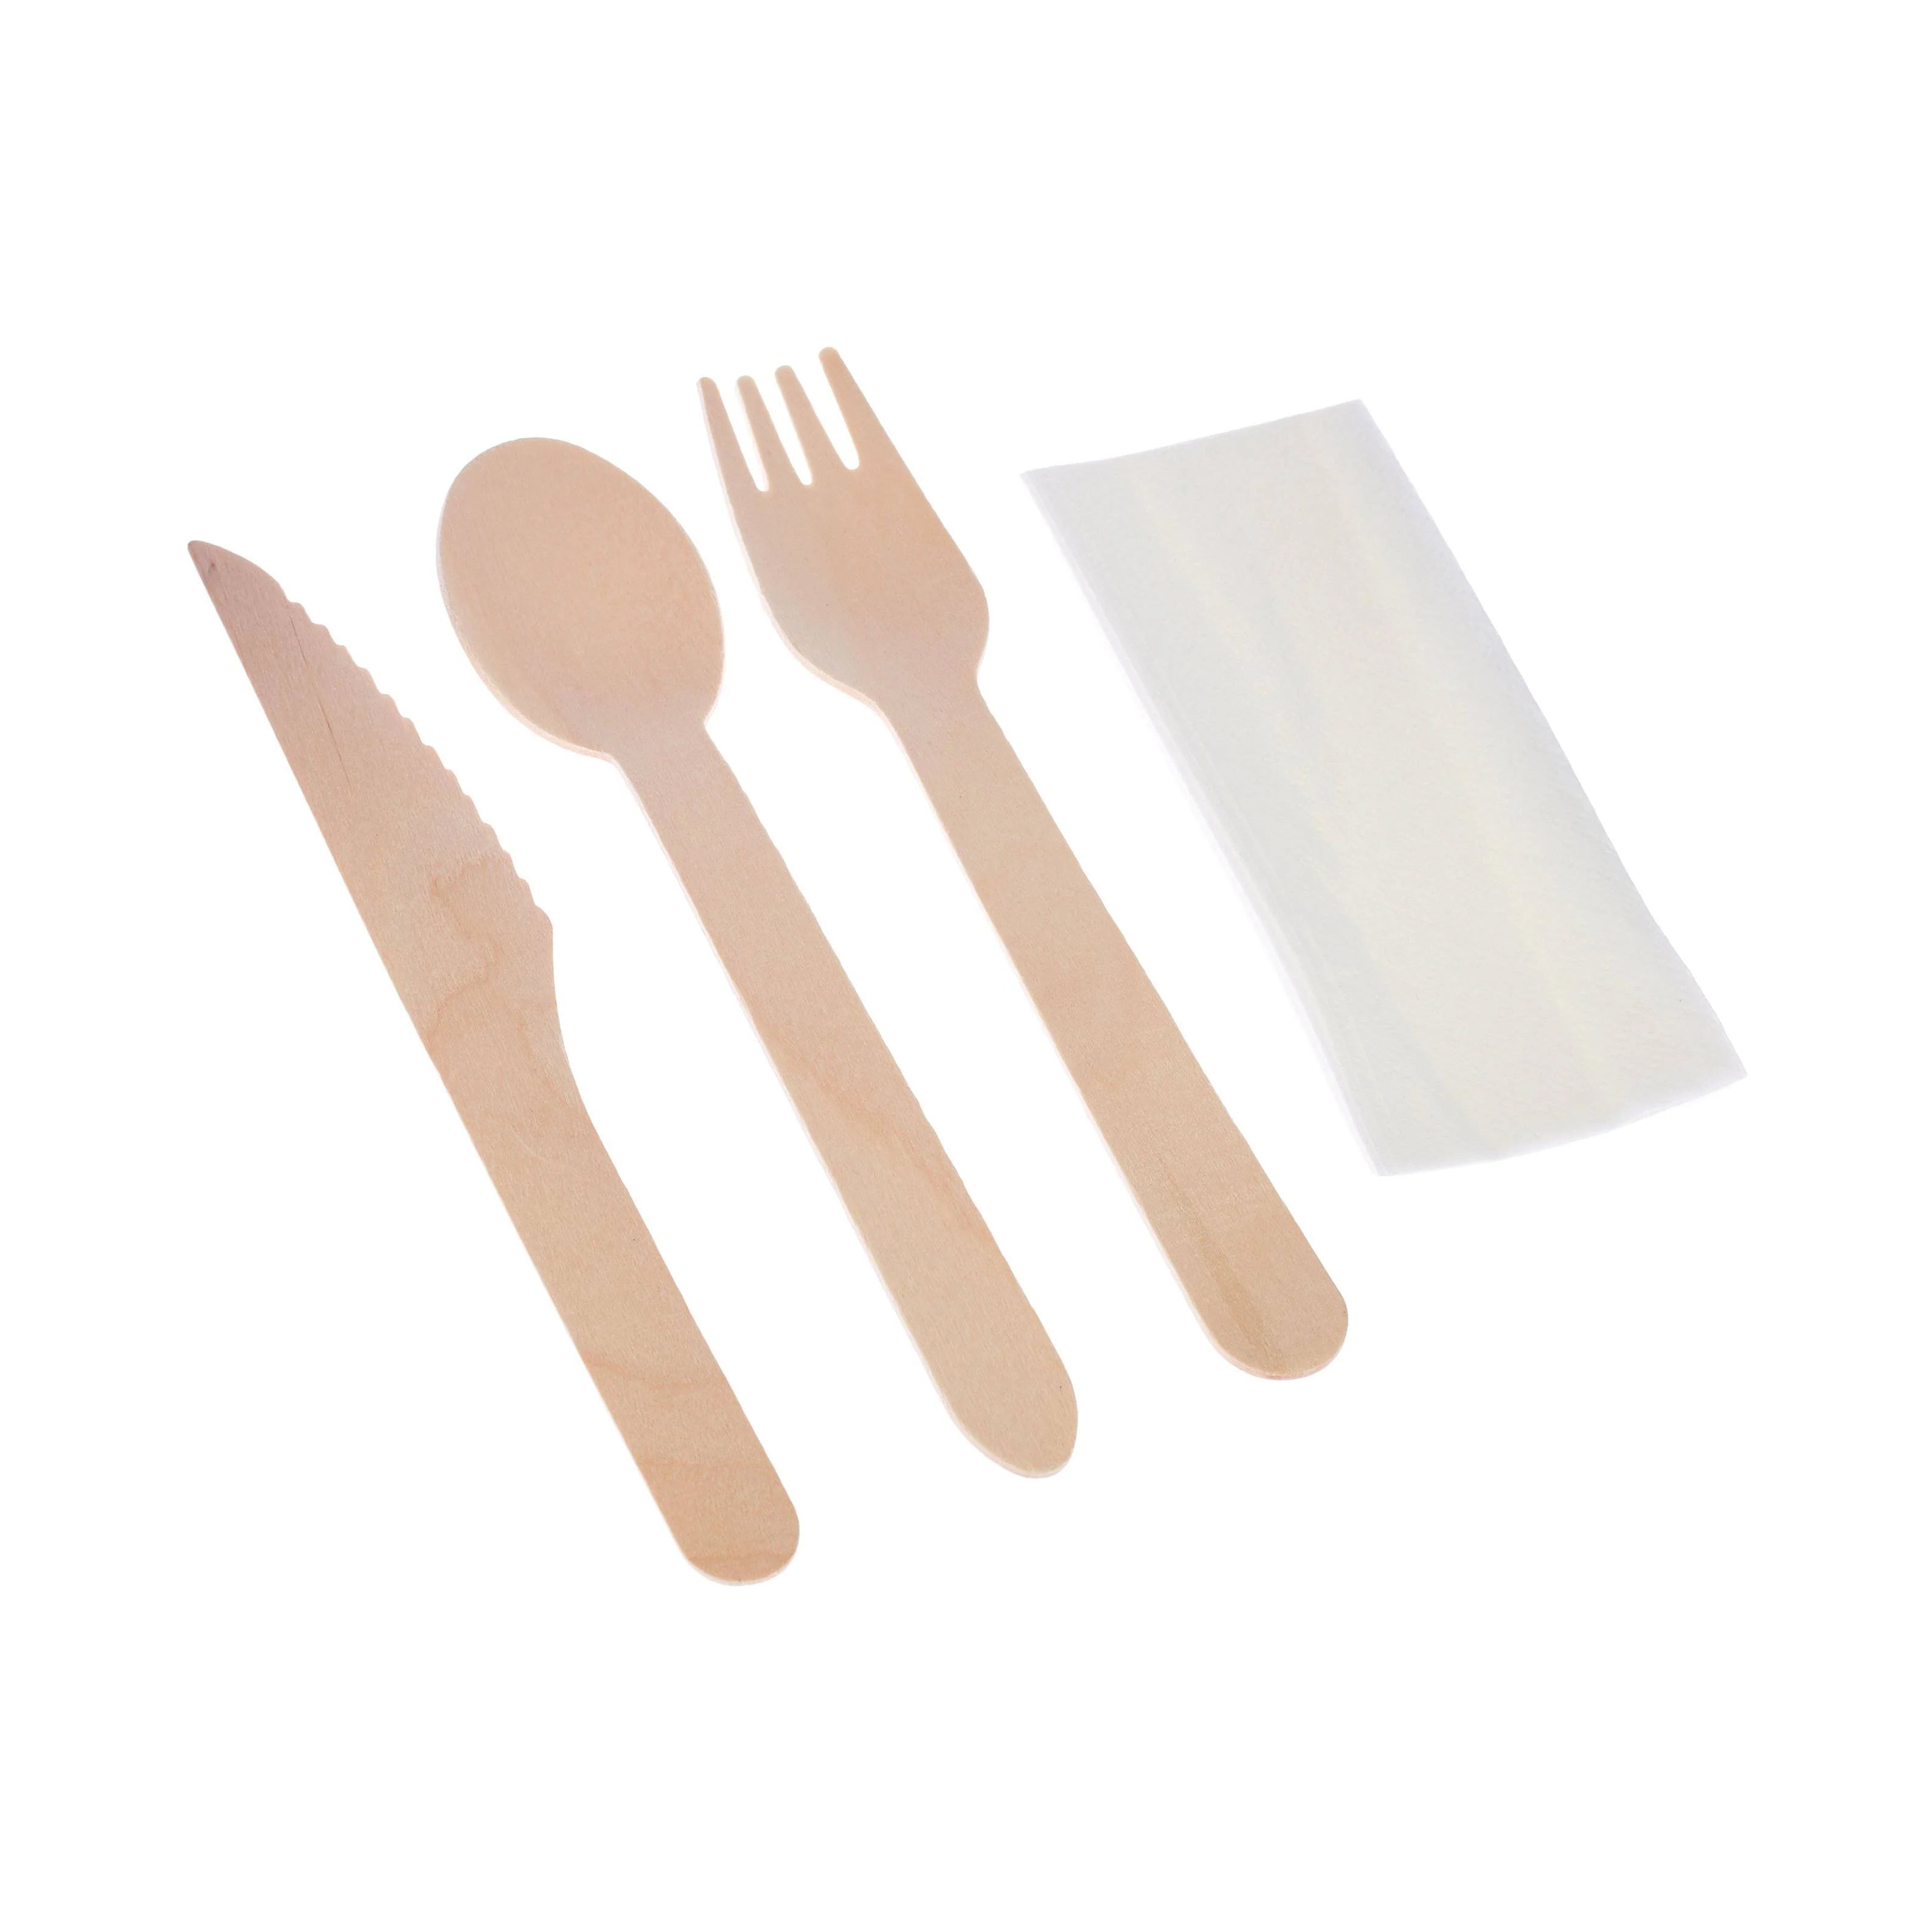 250 Pieces Wooden Cutlery Pack - Spoon, Fork, Knife, Napkin